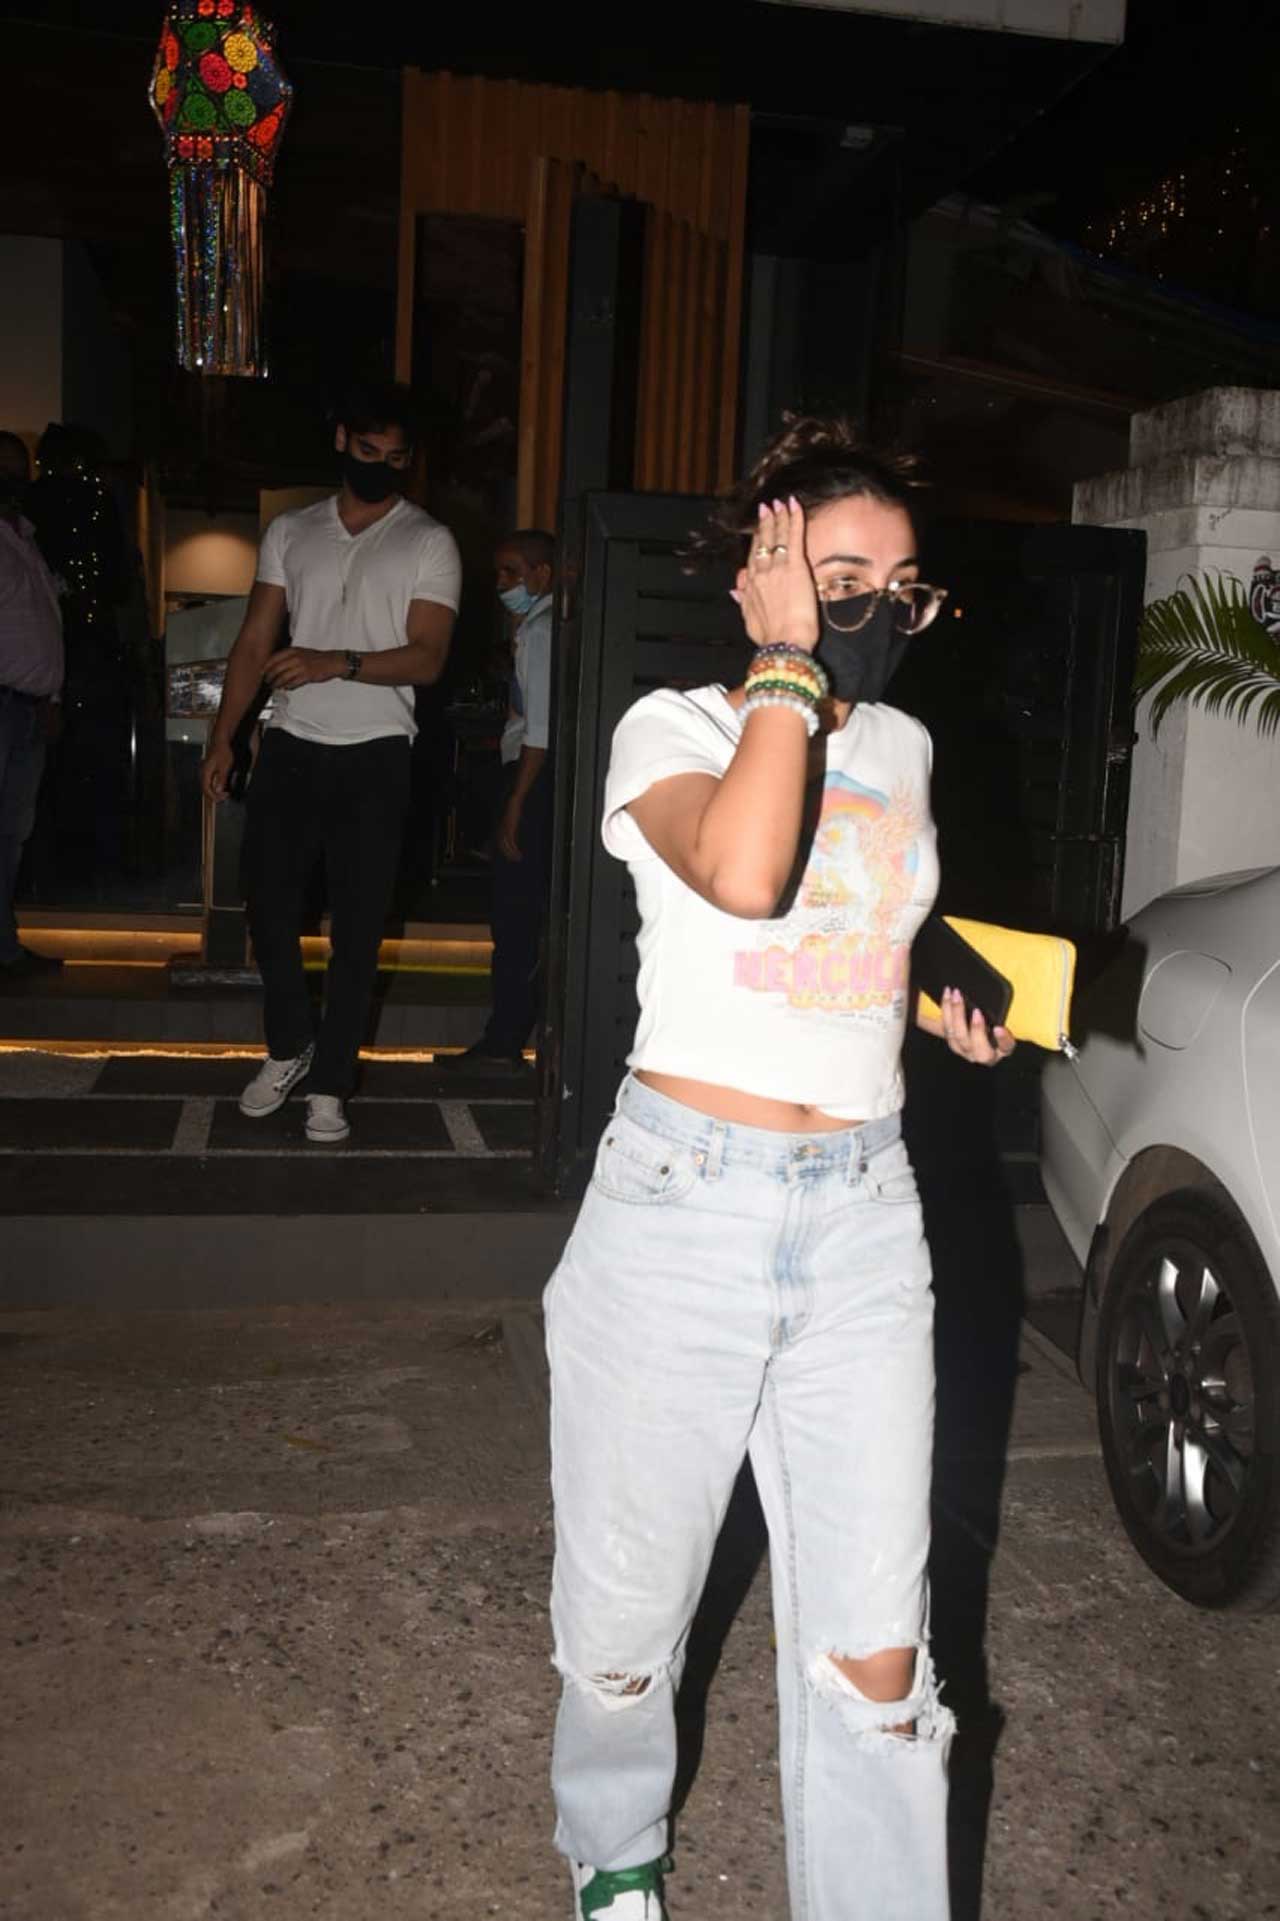 As Tania walked towards the car, Ahan Shetty was seen following soon after his ladylove. Ahan is all set to make his big Bollywood debut with Tadap. The film, directed by Milan Luthria, is a Hindi remake of Telugu hit RX100. It stars Tara Sutaria as the leading lady, along with Sikander Kher, Sharat Saxena, Naufal Azmir Khan, Suniel Shetty and Amit Sadh in supporting roles.